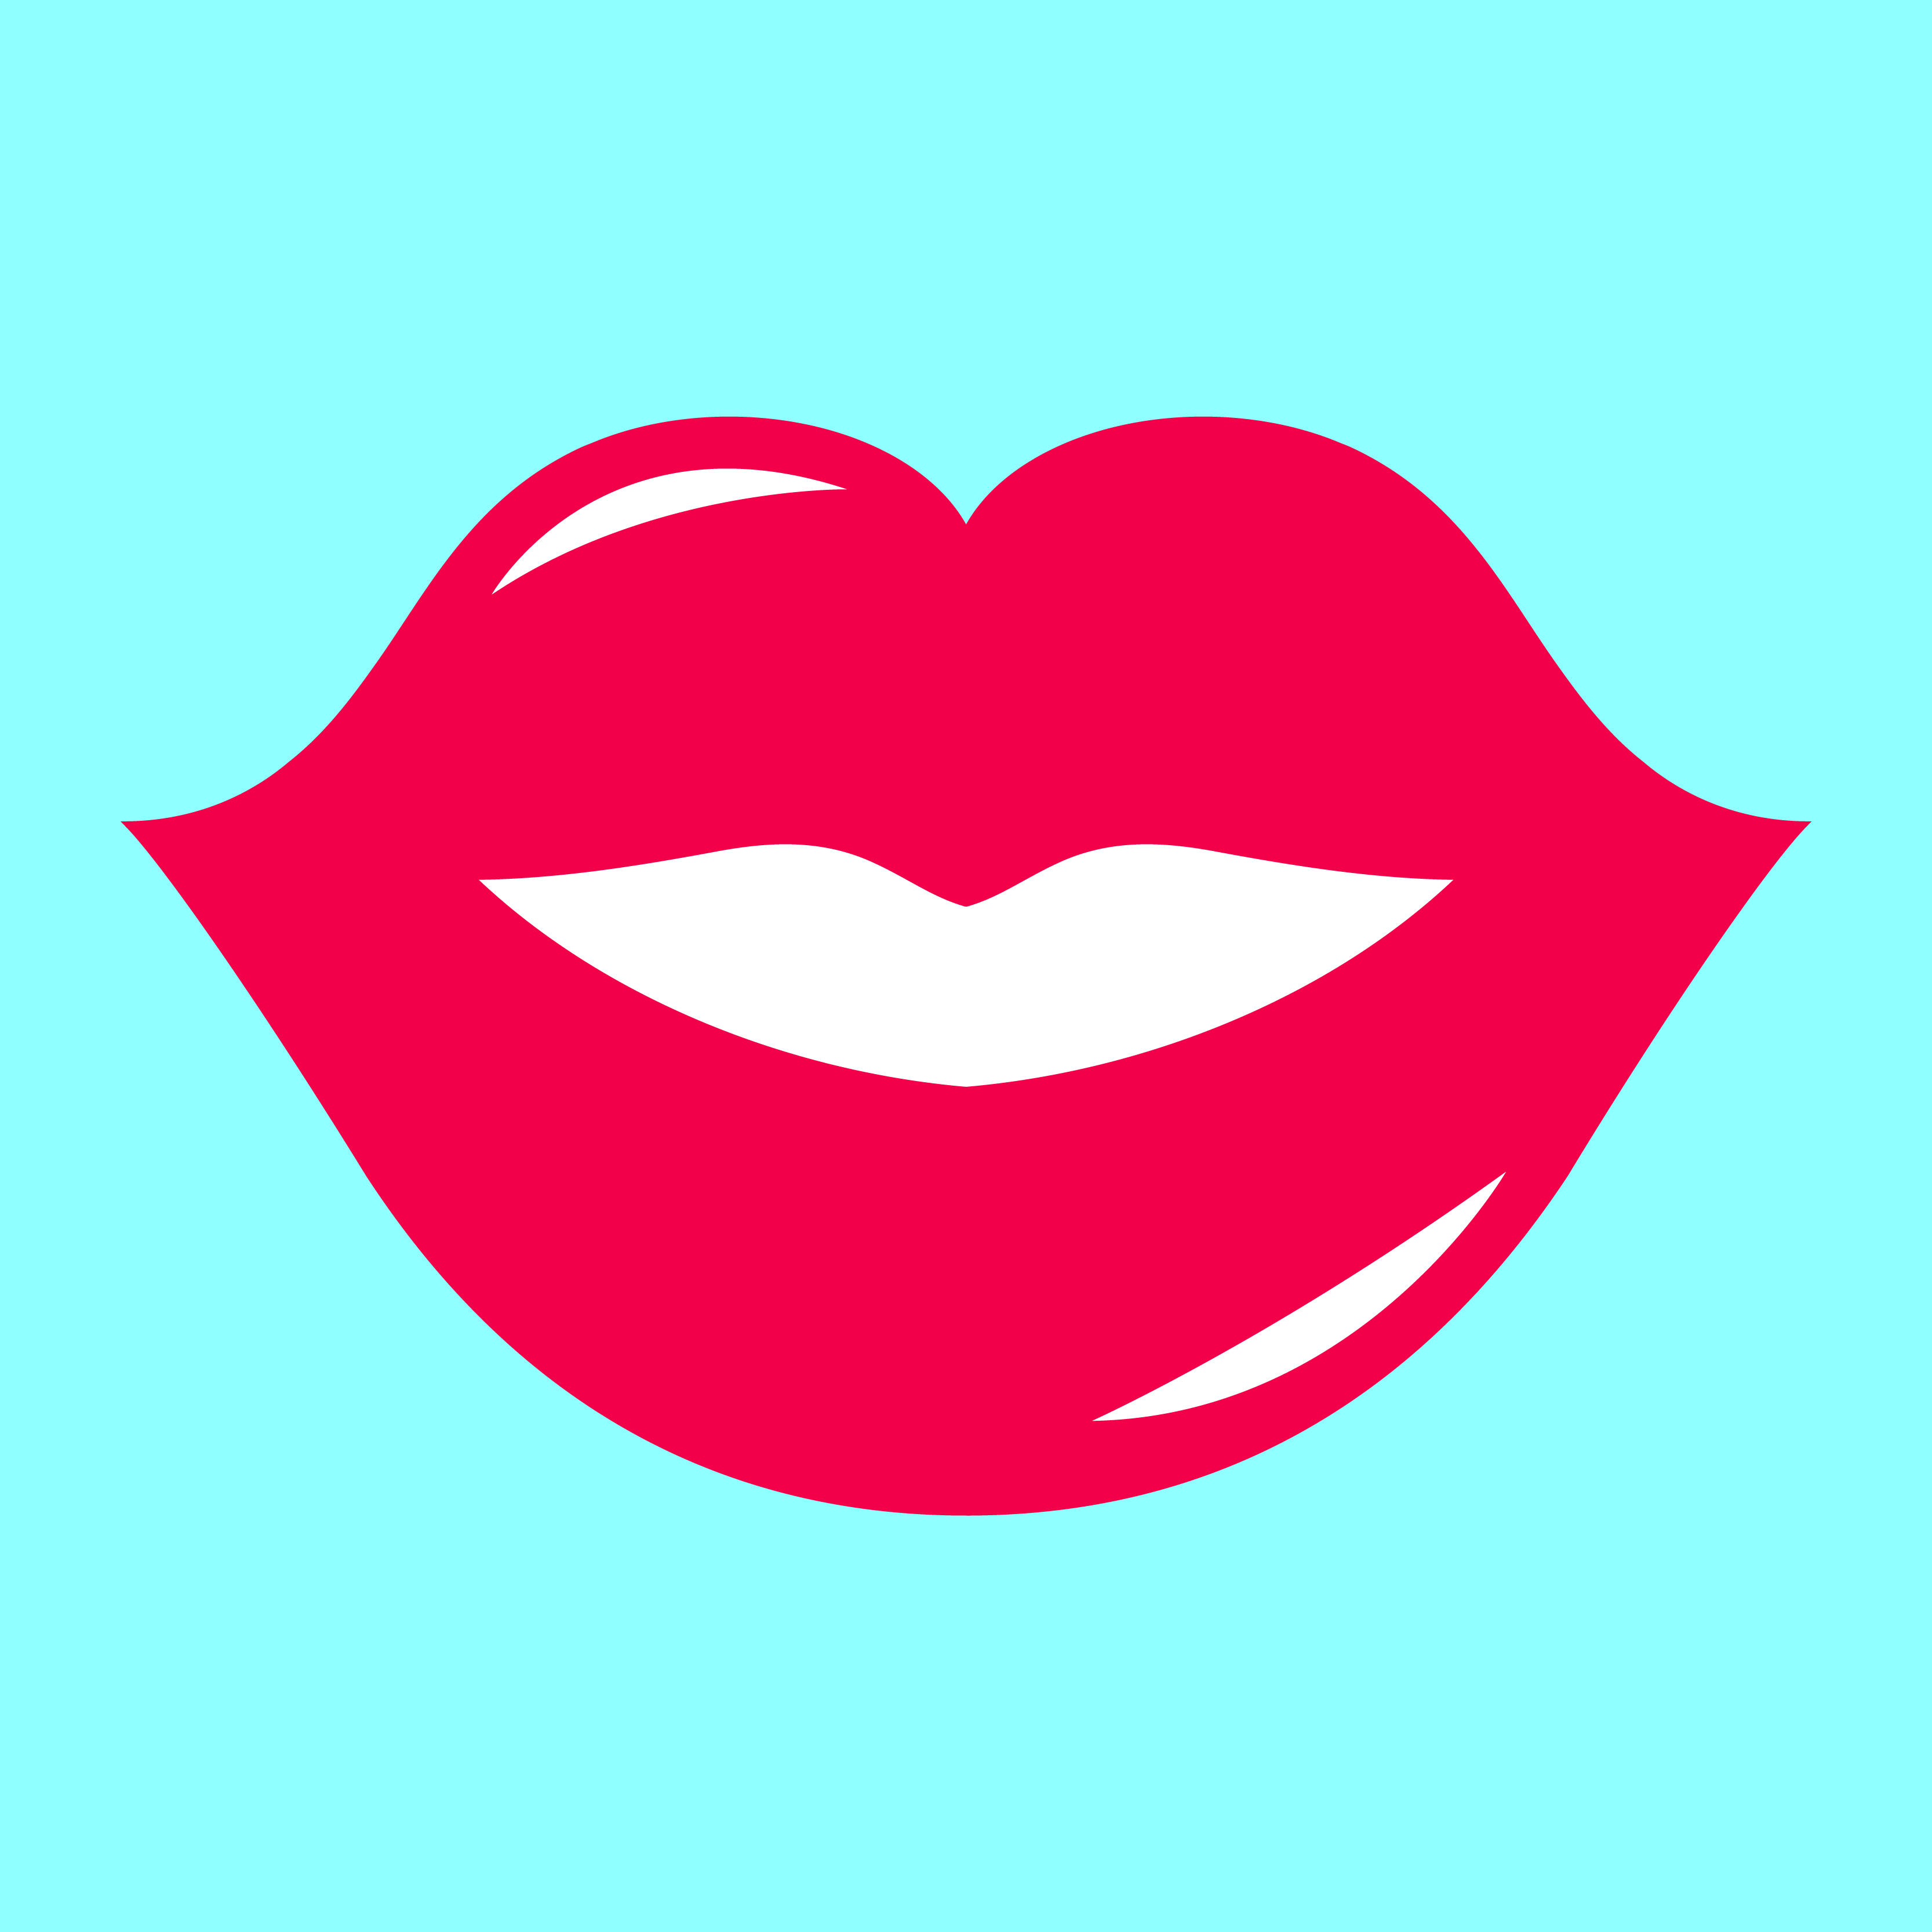 Download Sexy Lips Vector Icon - Download Free Vectors, Clipart ...